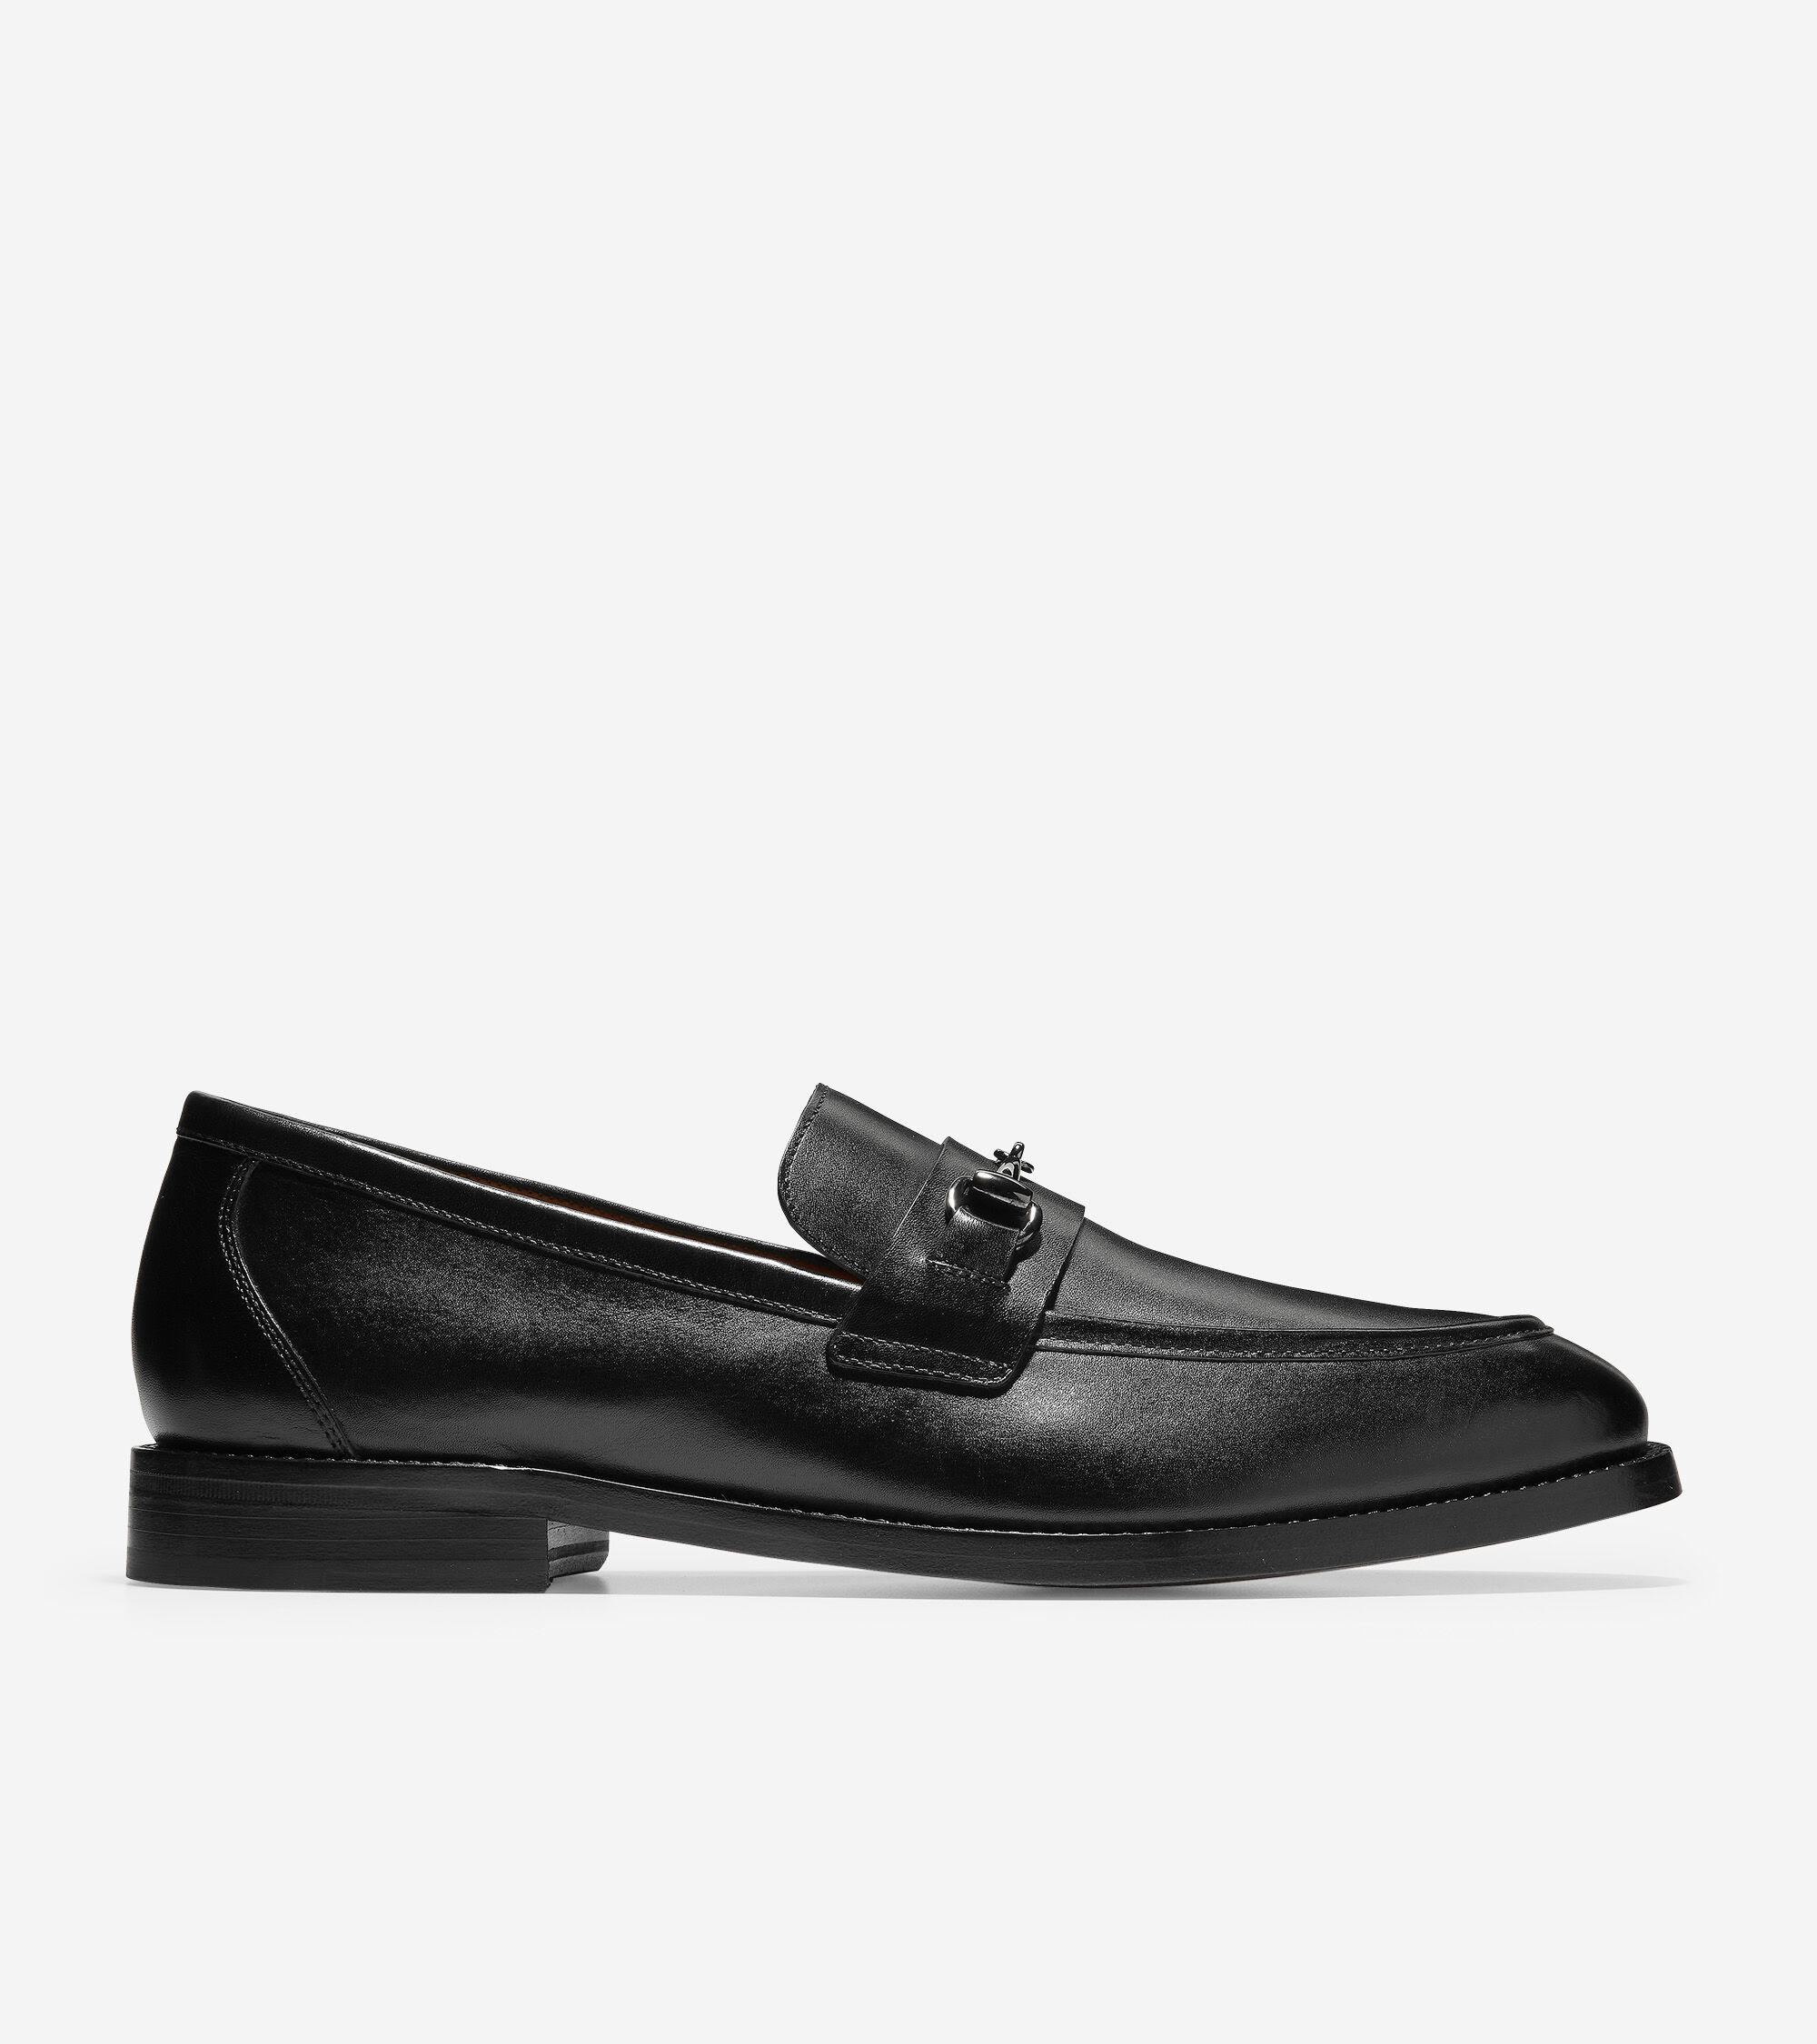 mens black shoes with buckle